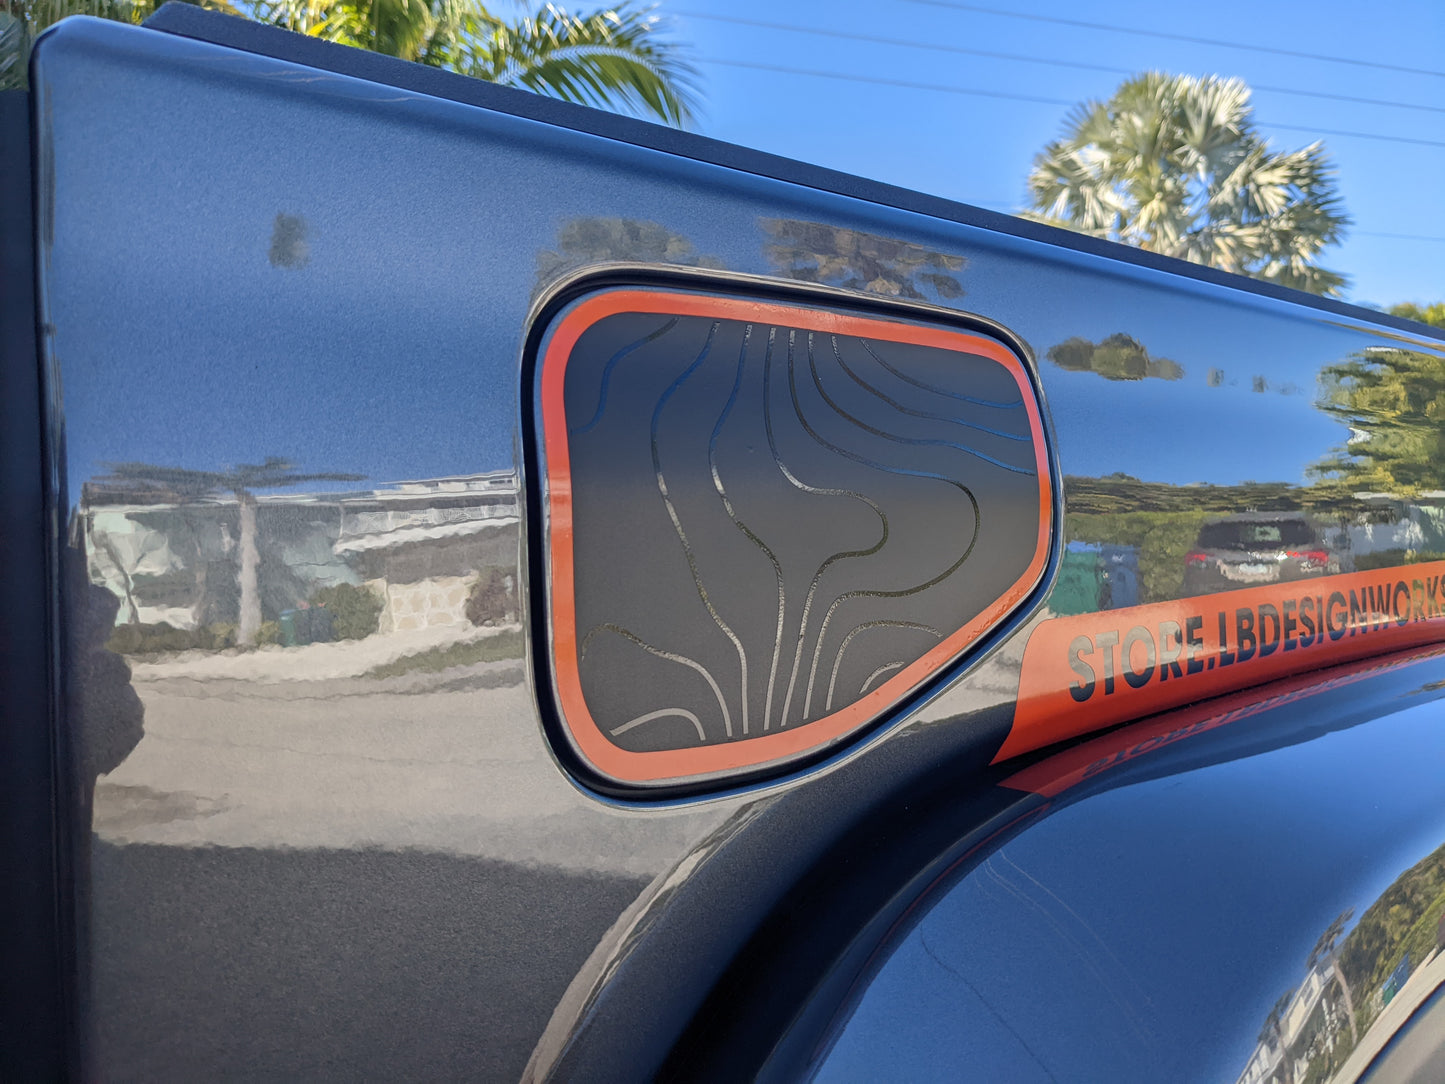 Topographical Red Line Rubicon Blackout Decal- Fits Jeep Gladiator Gas Door